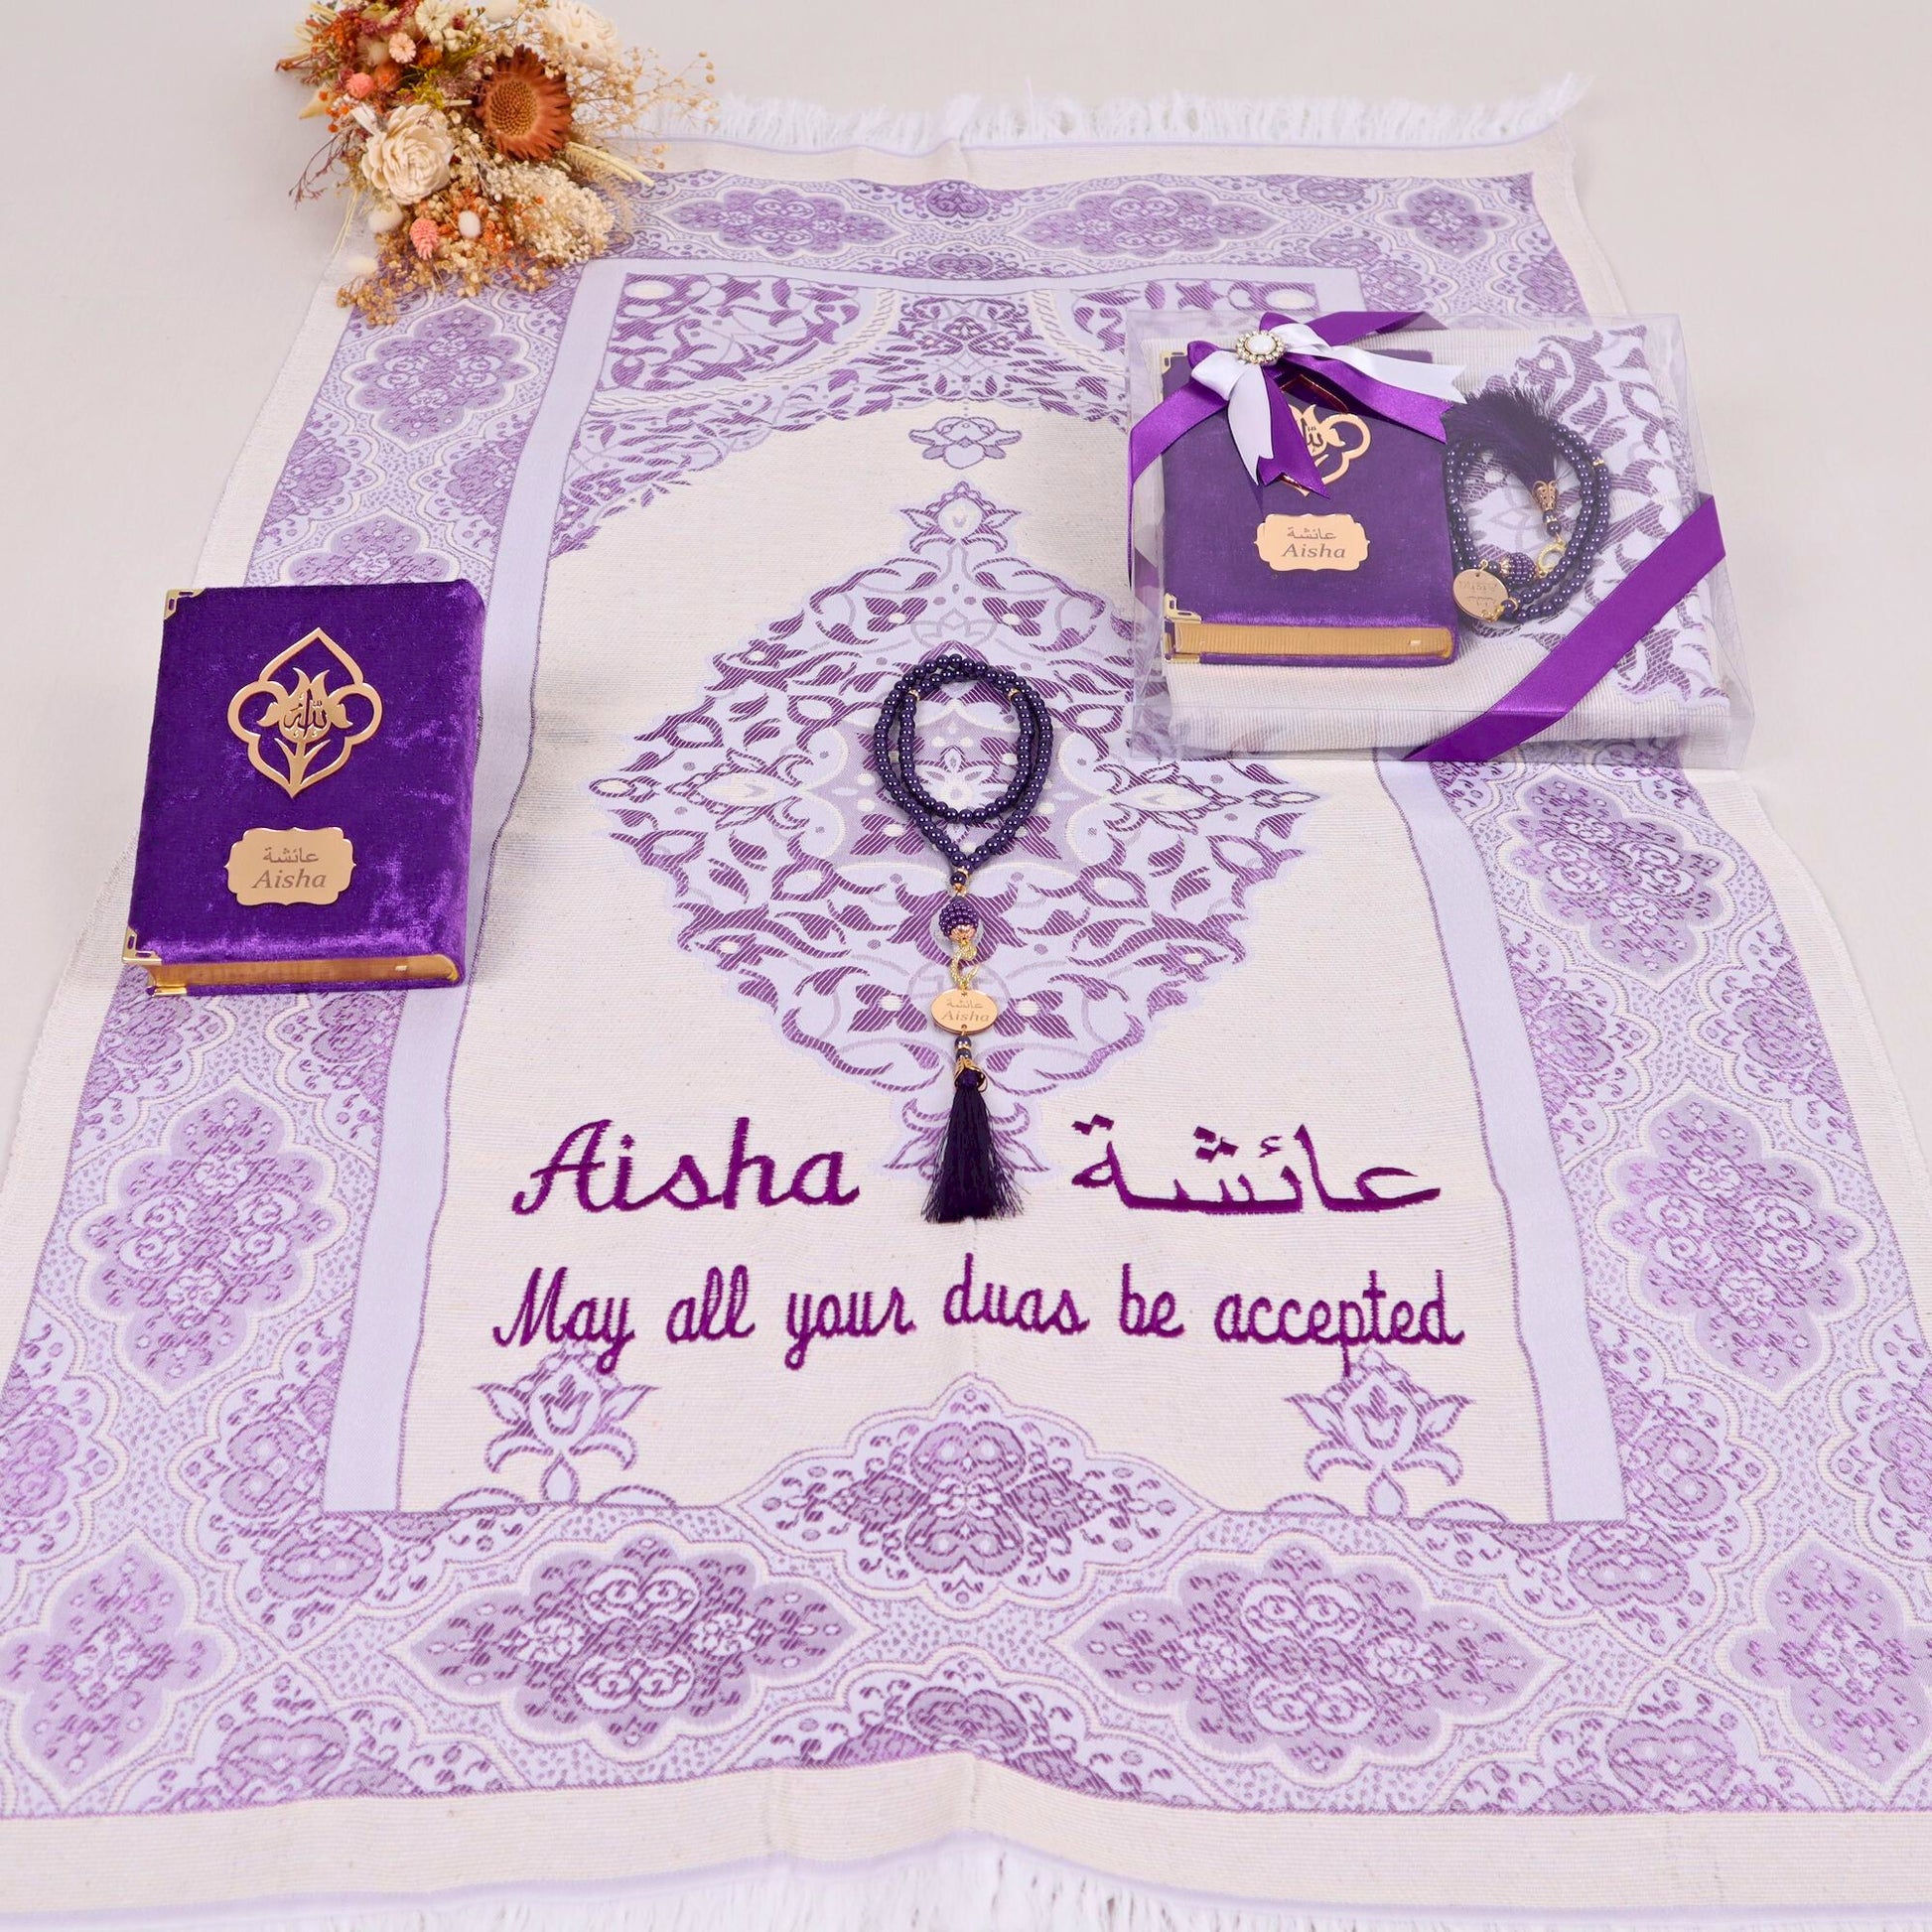 Personalized Travel Prayer Mat Quran Tasbeeh Islamic Muslim Gift Set - Islamic Elite Favors is a handmade gift shop offering a wide variety of unique and personalized gifts for all occasions. Whether you're looking for the perfect Ramadan, Eid, Hajj, wedding gift or something special for a birthday, baby shower or anniversary, we have something for everyone. High quality, made with love.